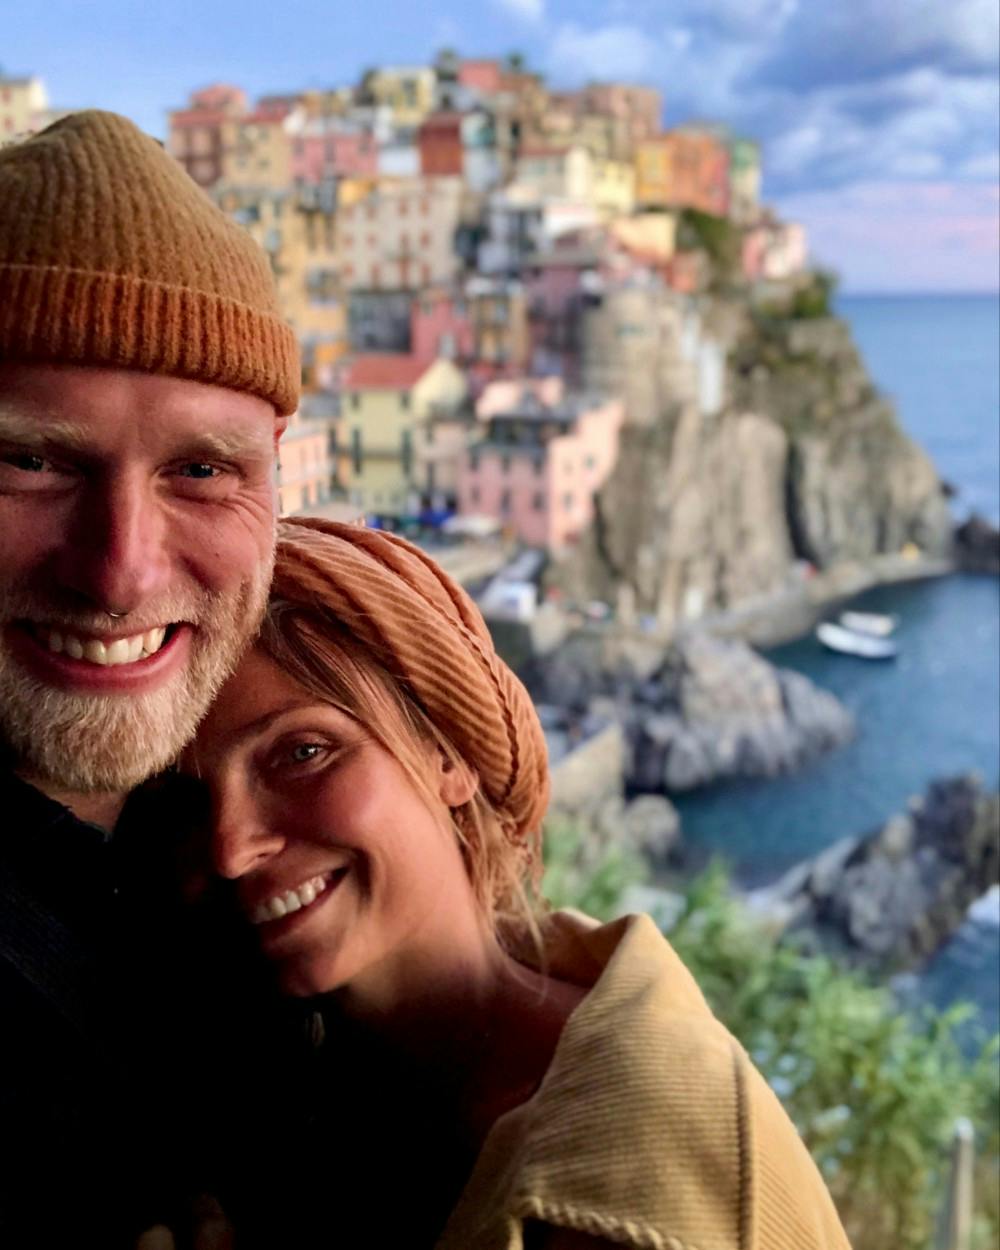 A close-up selfie of a smiling couple, with the man wearing a warm beanie and the woman sporting a headscarf, both enjoying a cozy moment. They are positioned against a blurred backdrop of Manarola, Cinque Terre, with its distinctive colorful houses perched on rugged cliffs beside the sea. The image captures the warmth of the couple's relationship set against the romantic and picturesque Italian Riviera, at what appears to be dusk, adding a soft, glowing light to the scene.